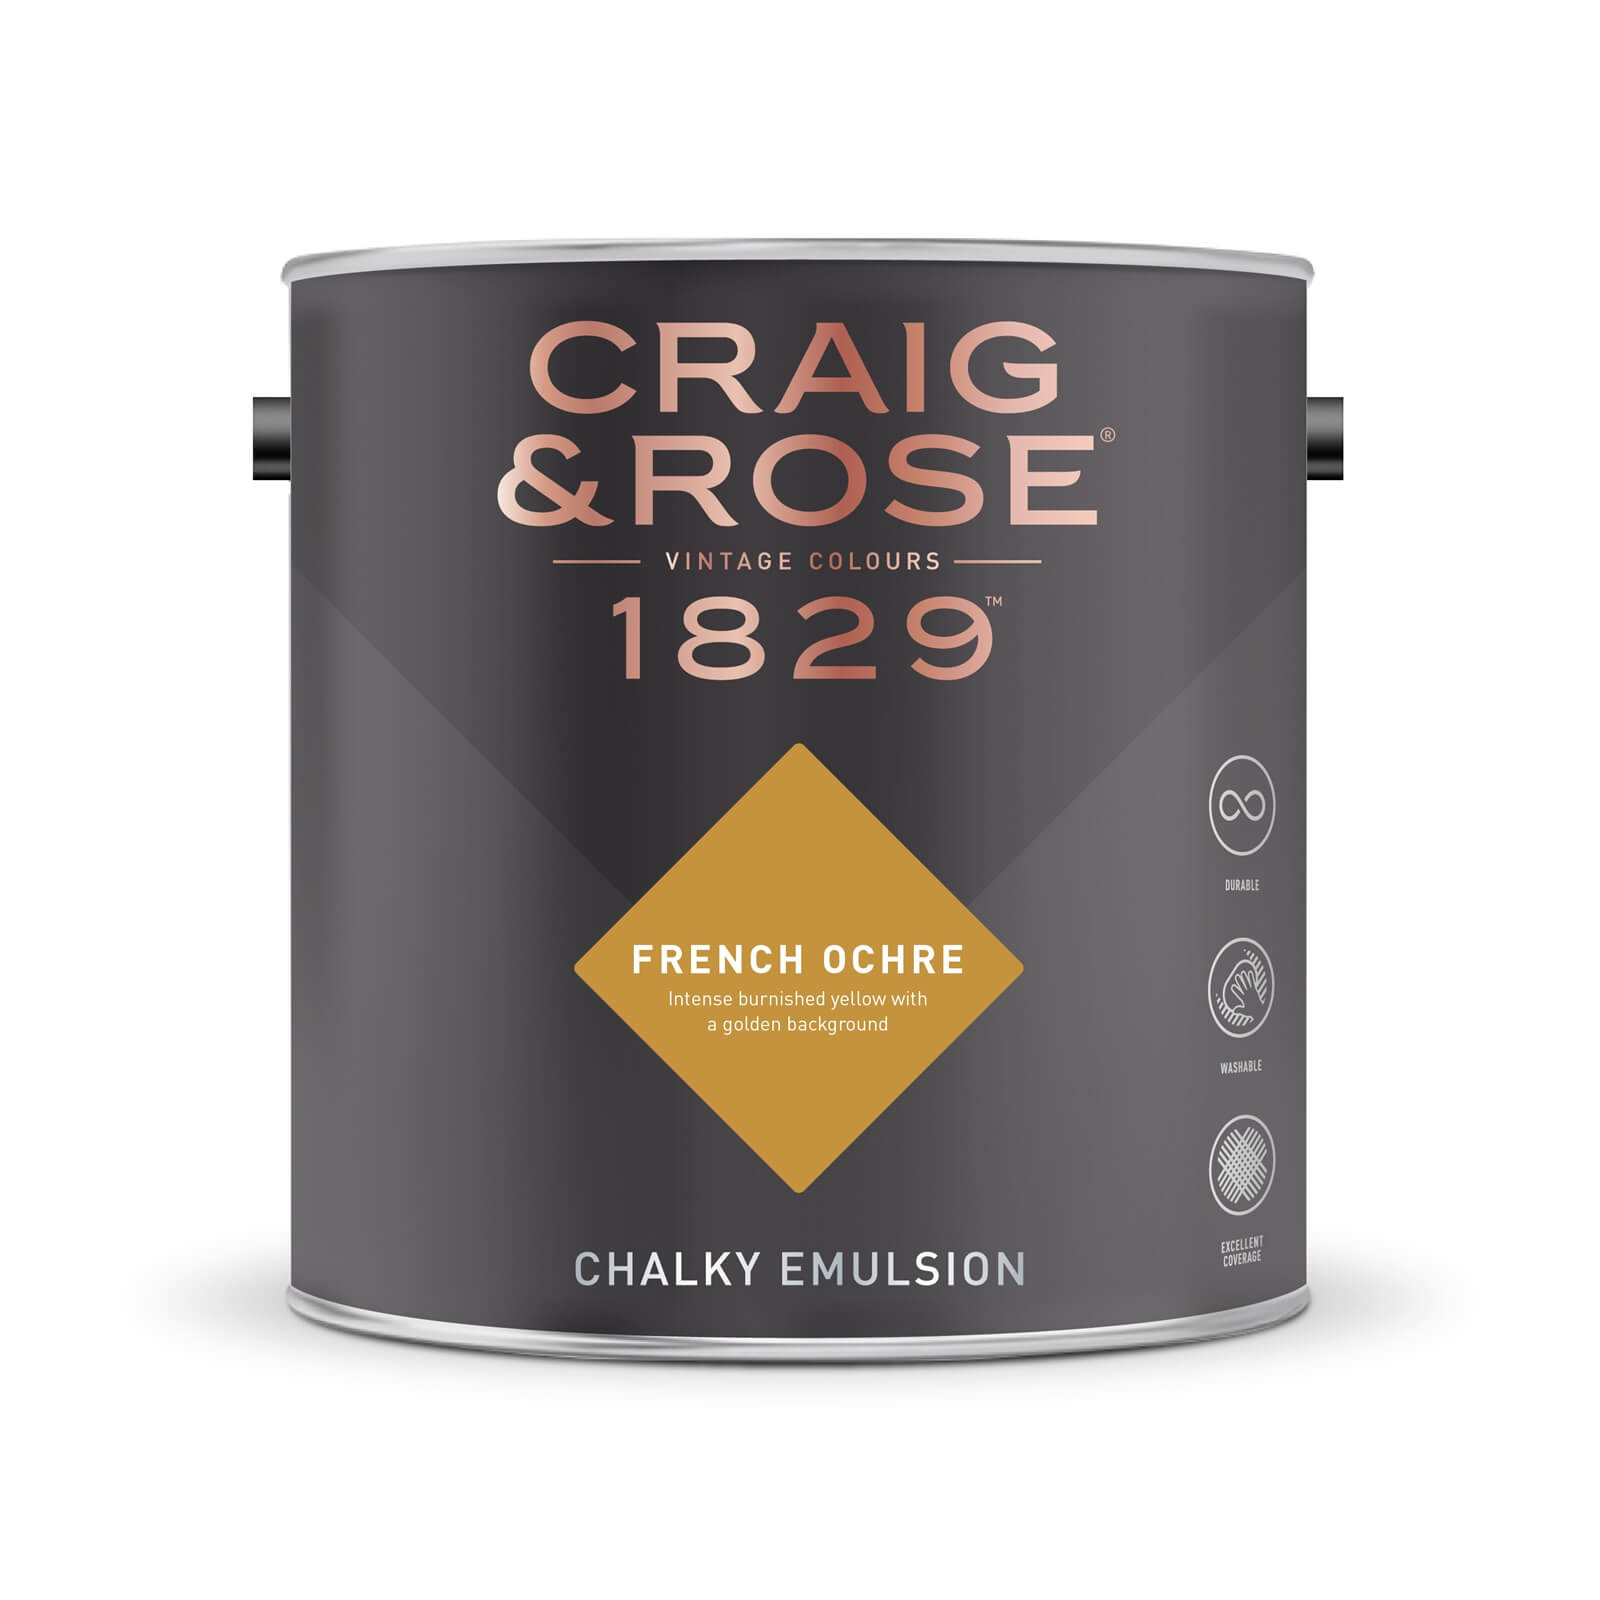 Craig & Rose 1829 Chalky Emulsion Paint French Ochre - 2.5L